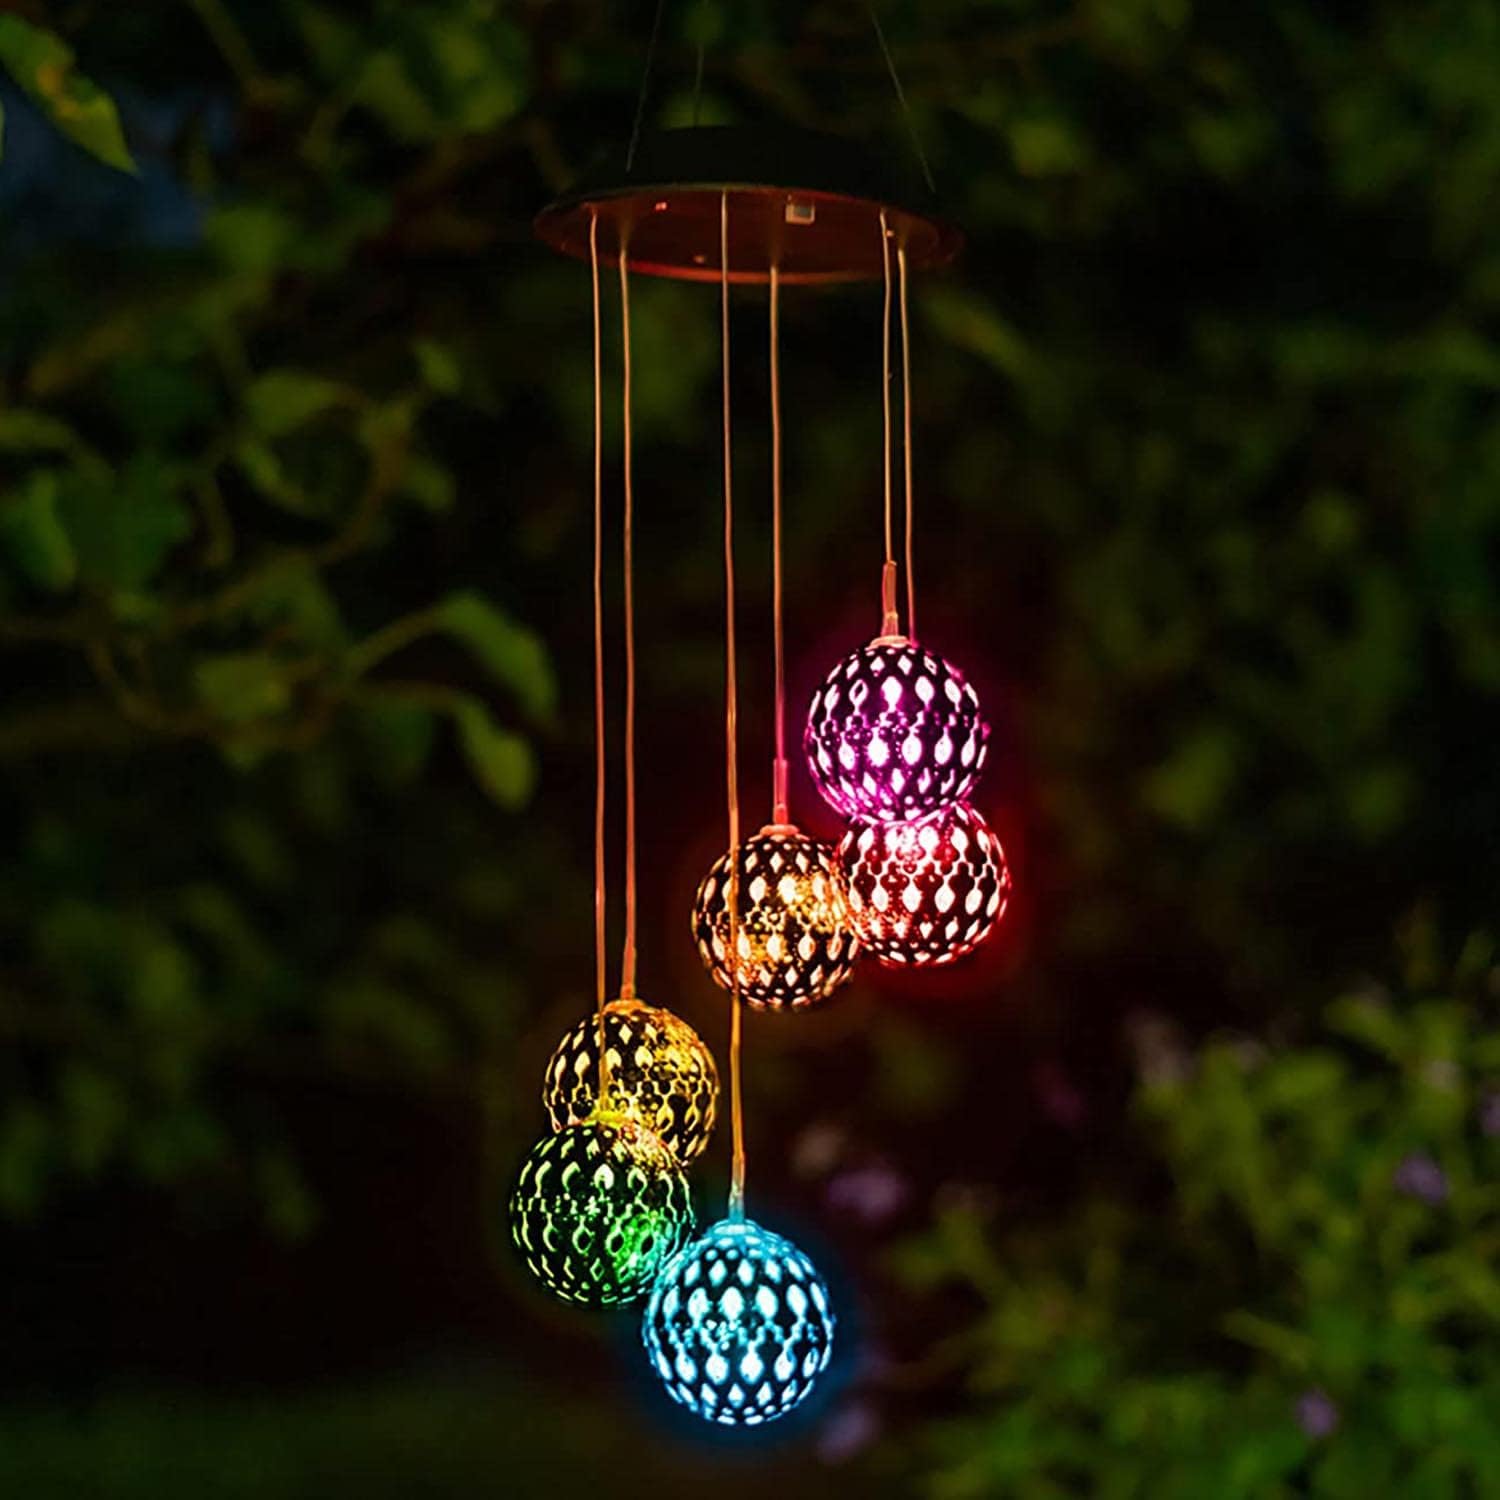 Solar powered multicolored wind chimes hanging from tree